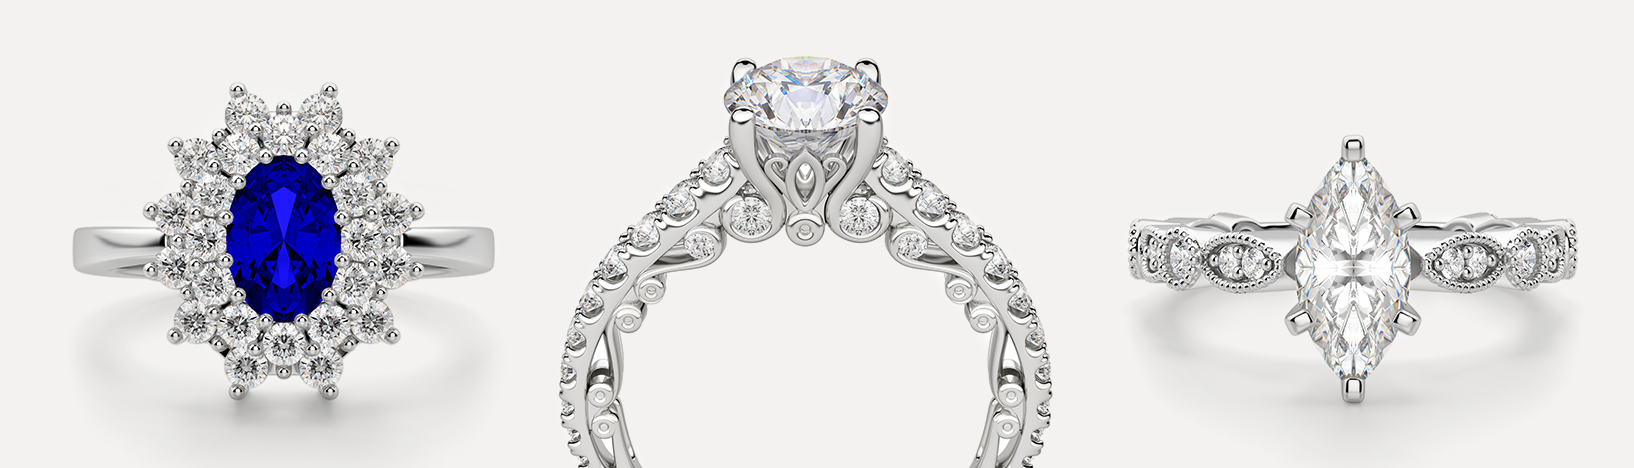 Simulated diamond engagement rings featuring different design elements.